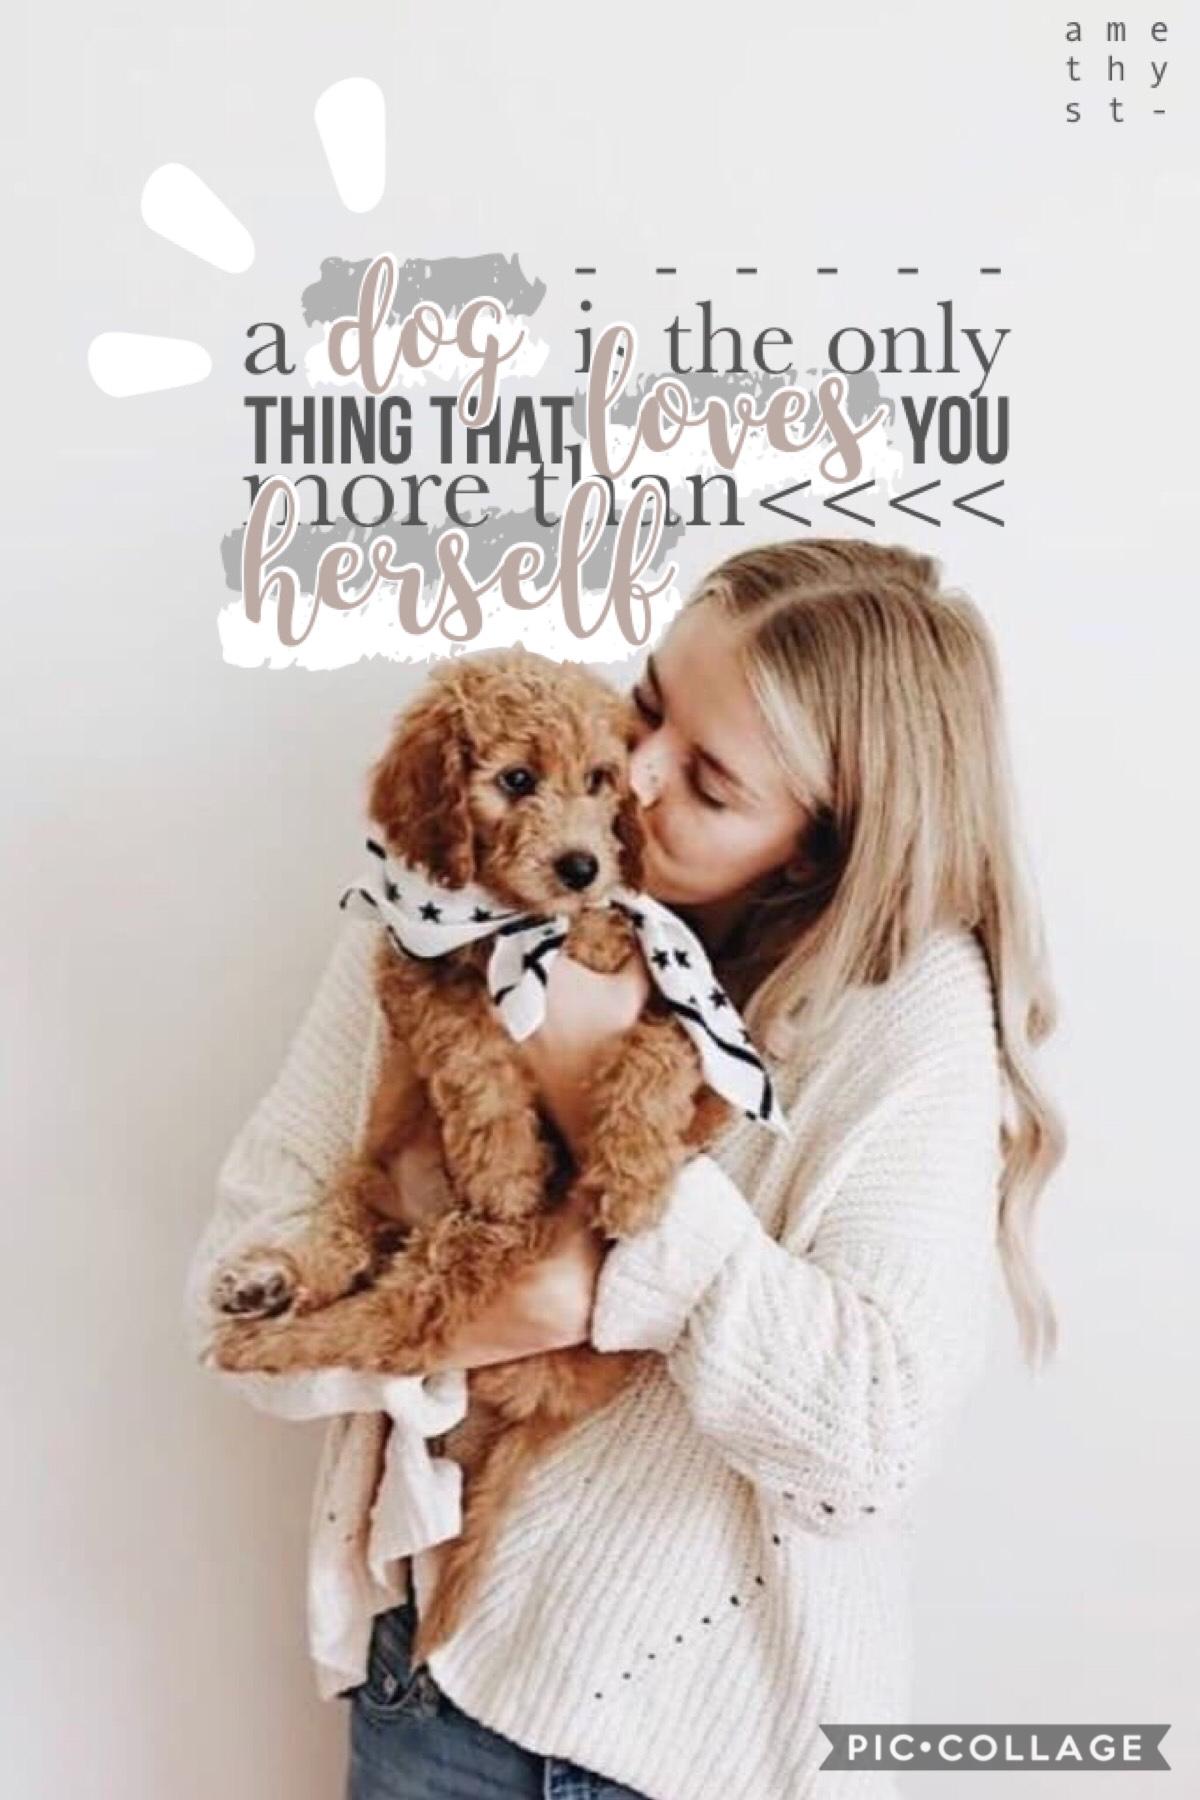 Yup, I changed this quote! It originally was “a dog is the only thing that loves you more than himself” but I changed it to HERSELF!
#GirlPower 💪👩💪😂
QOTD: any pets?
AOTD: yup, two dogs and a cat 🐶🐱